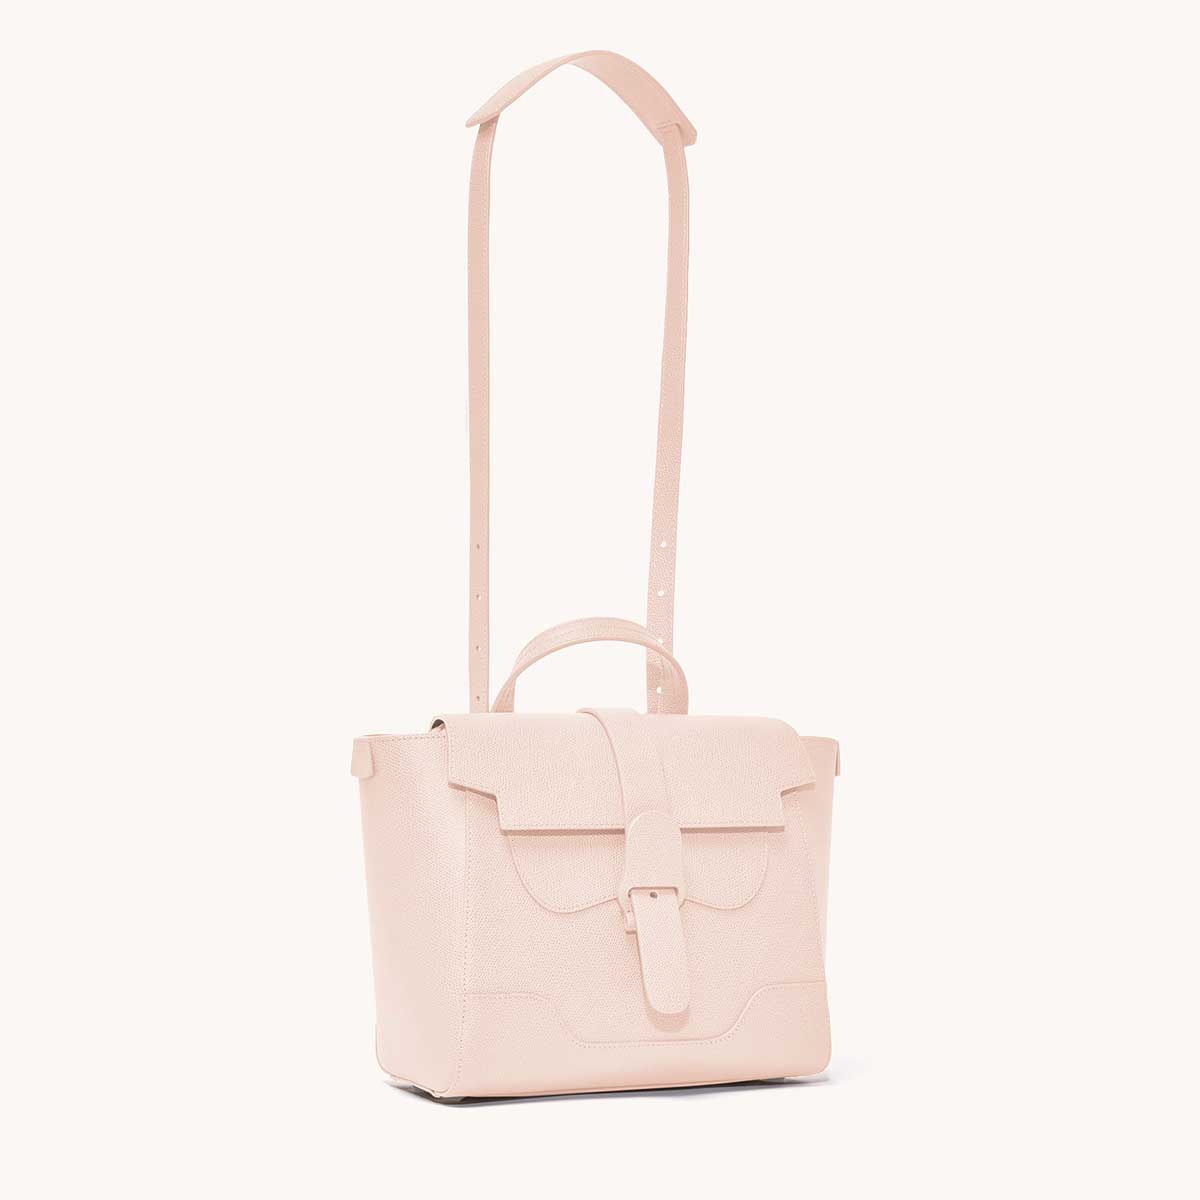 Midi Maestra Bag Pebbled Blush with Silver Hardware Front View with Long Strap